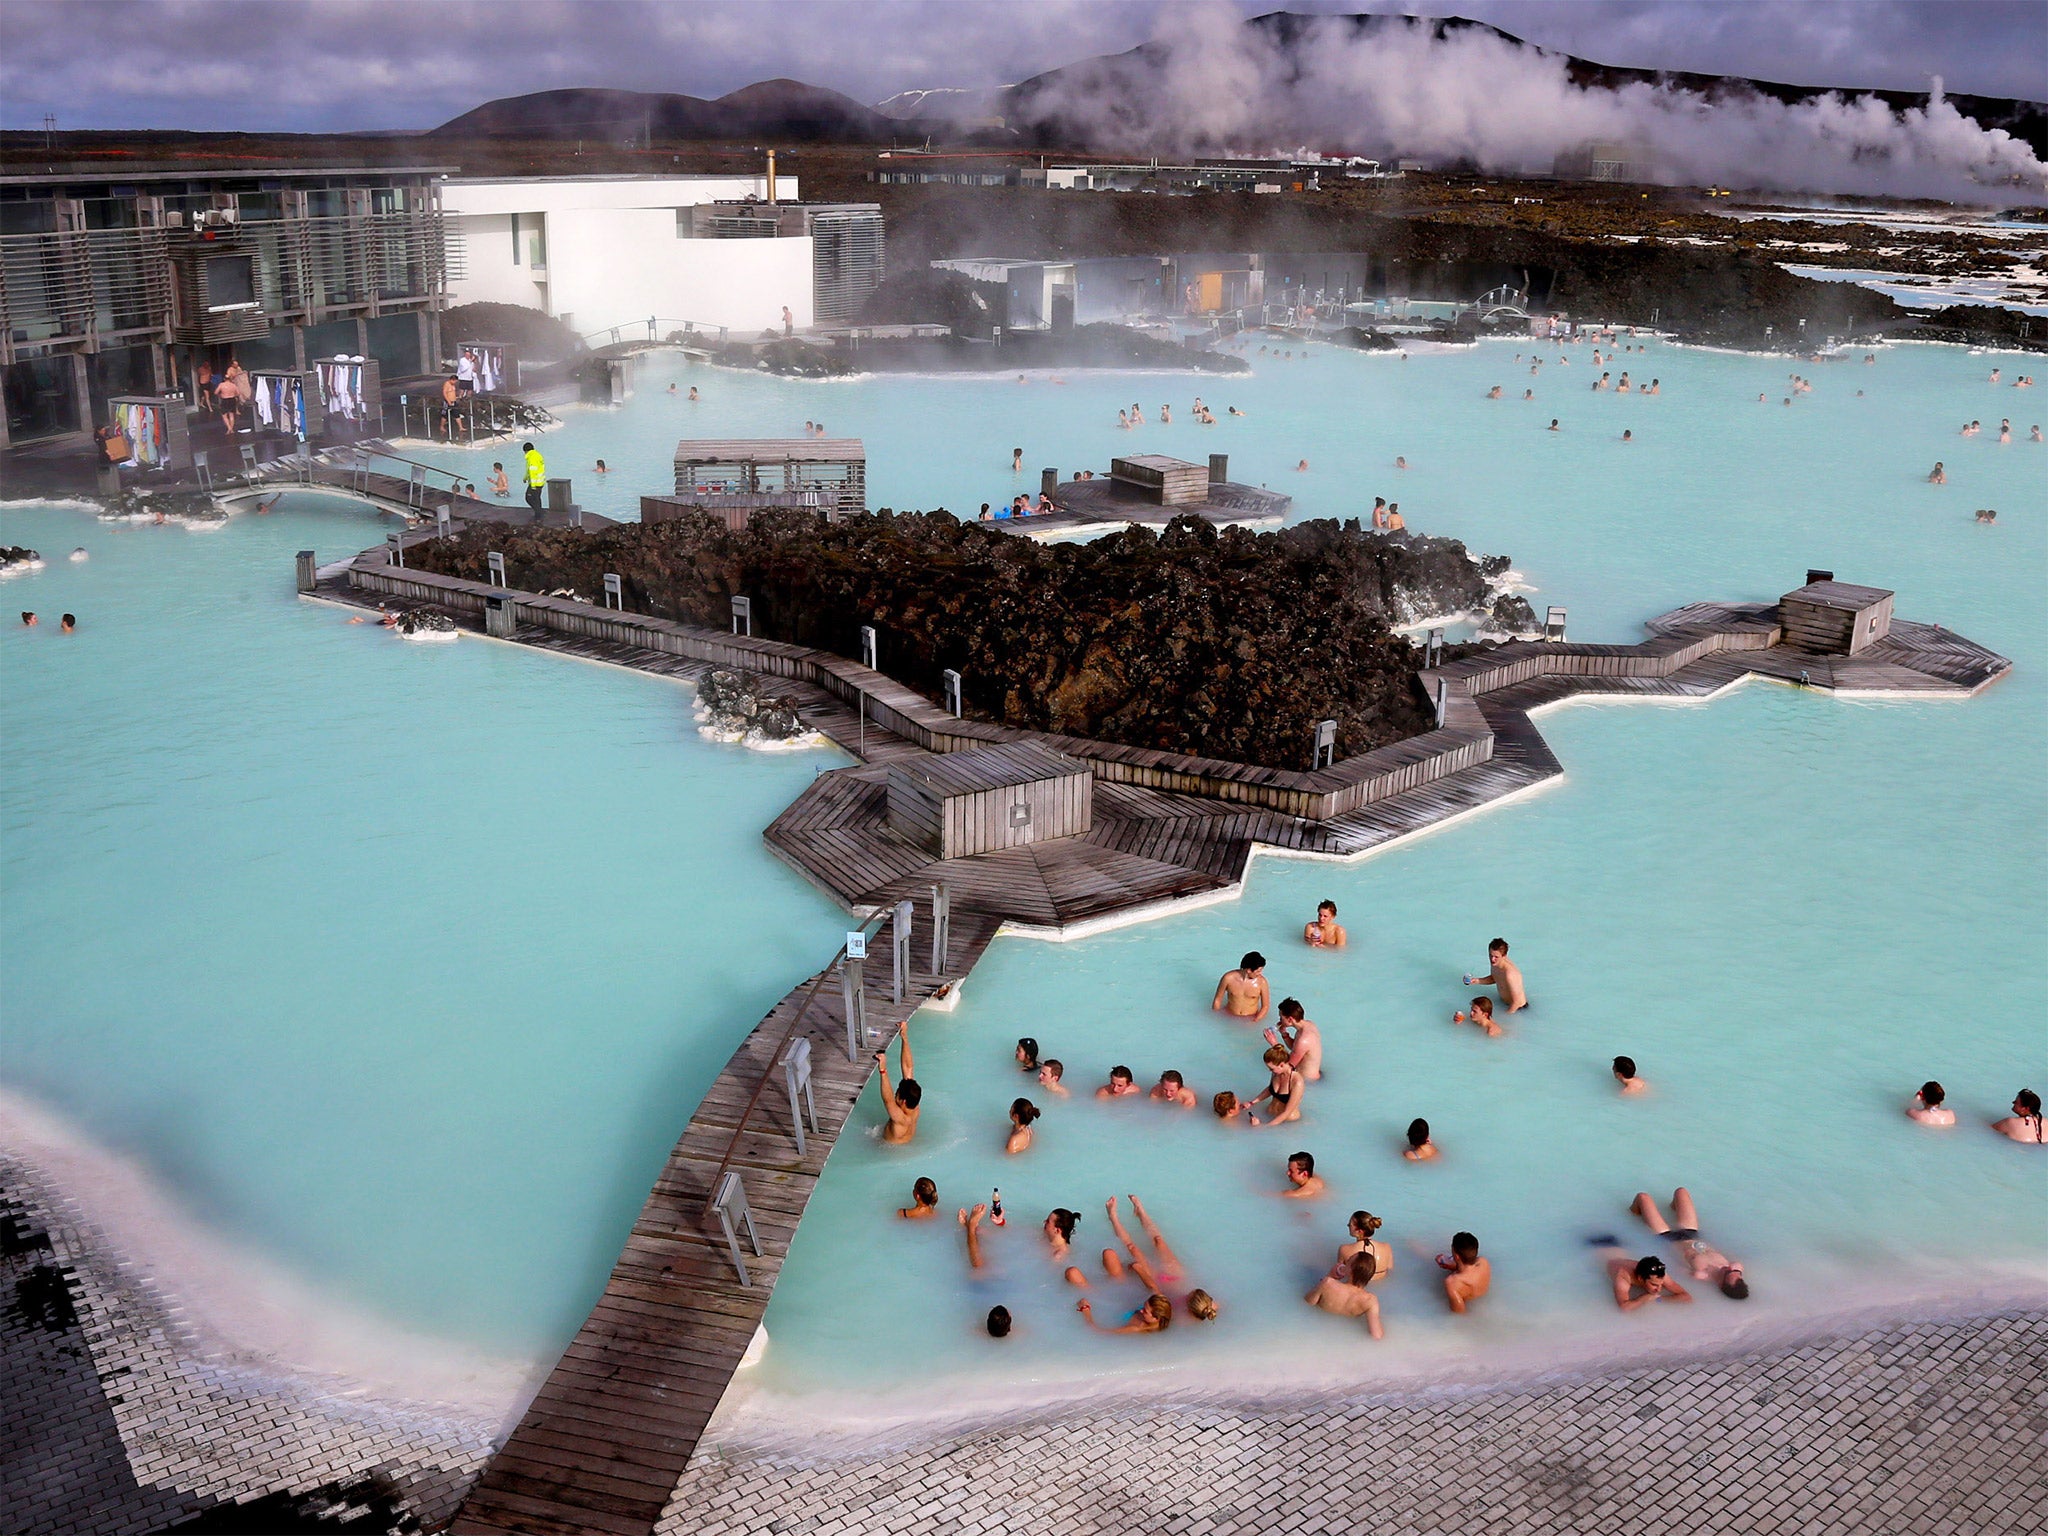 Geothermal waters at the Blue Lagoon near the Icelandic capital, Reykjavik – one of the country’s top attractions